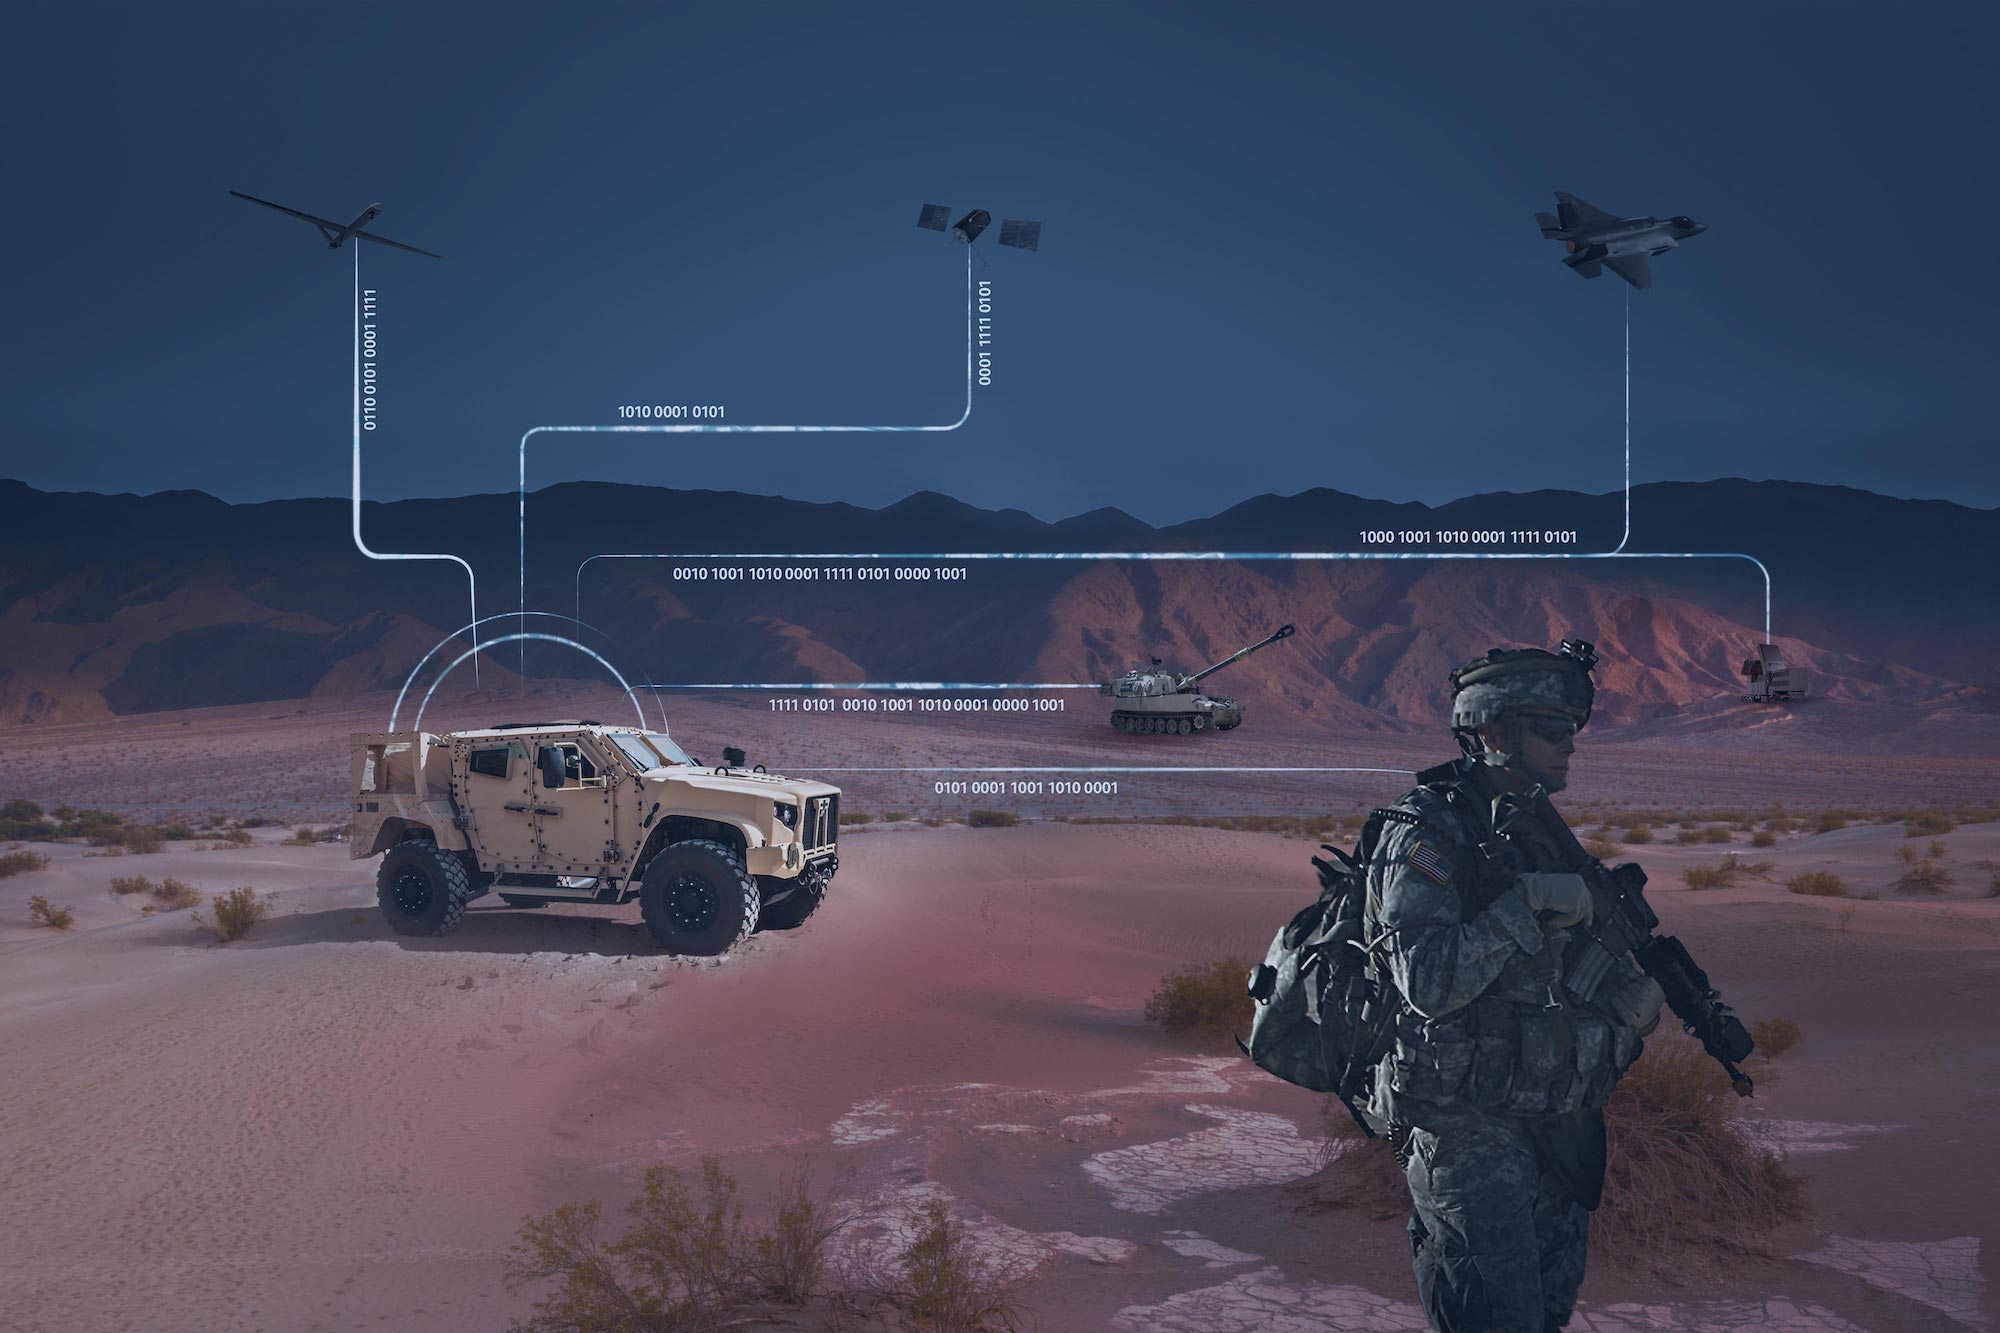 TITAN will help the armed forces make perception of all the information its sensors ingest